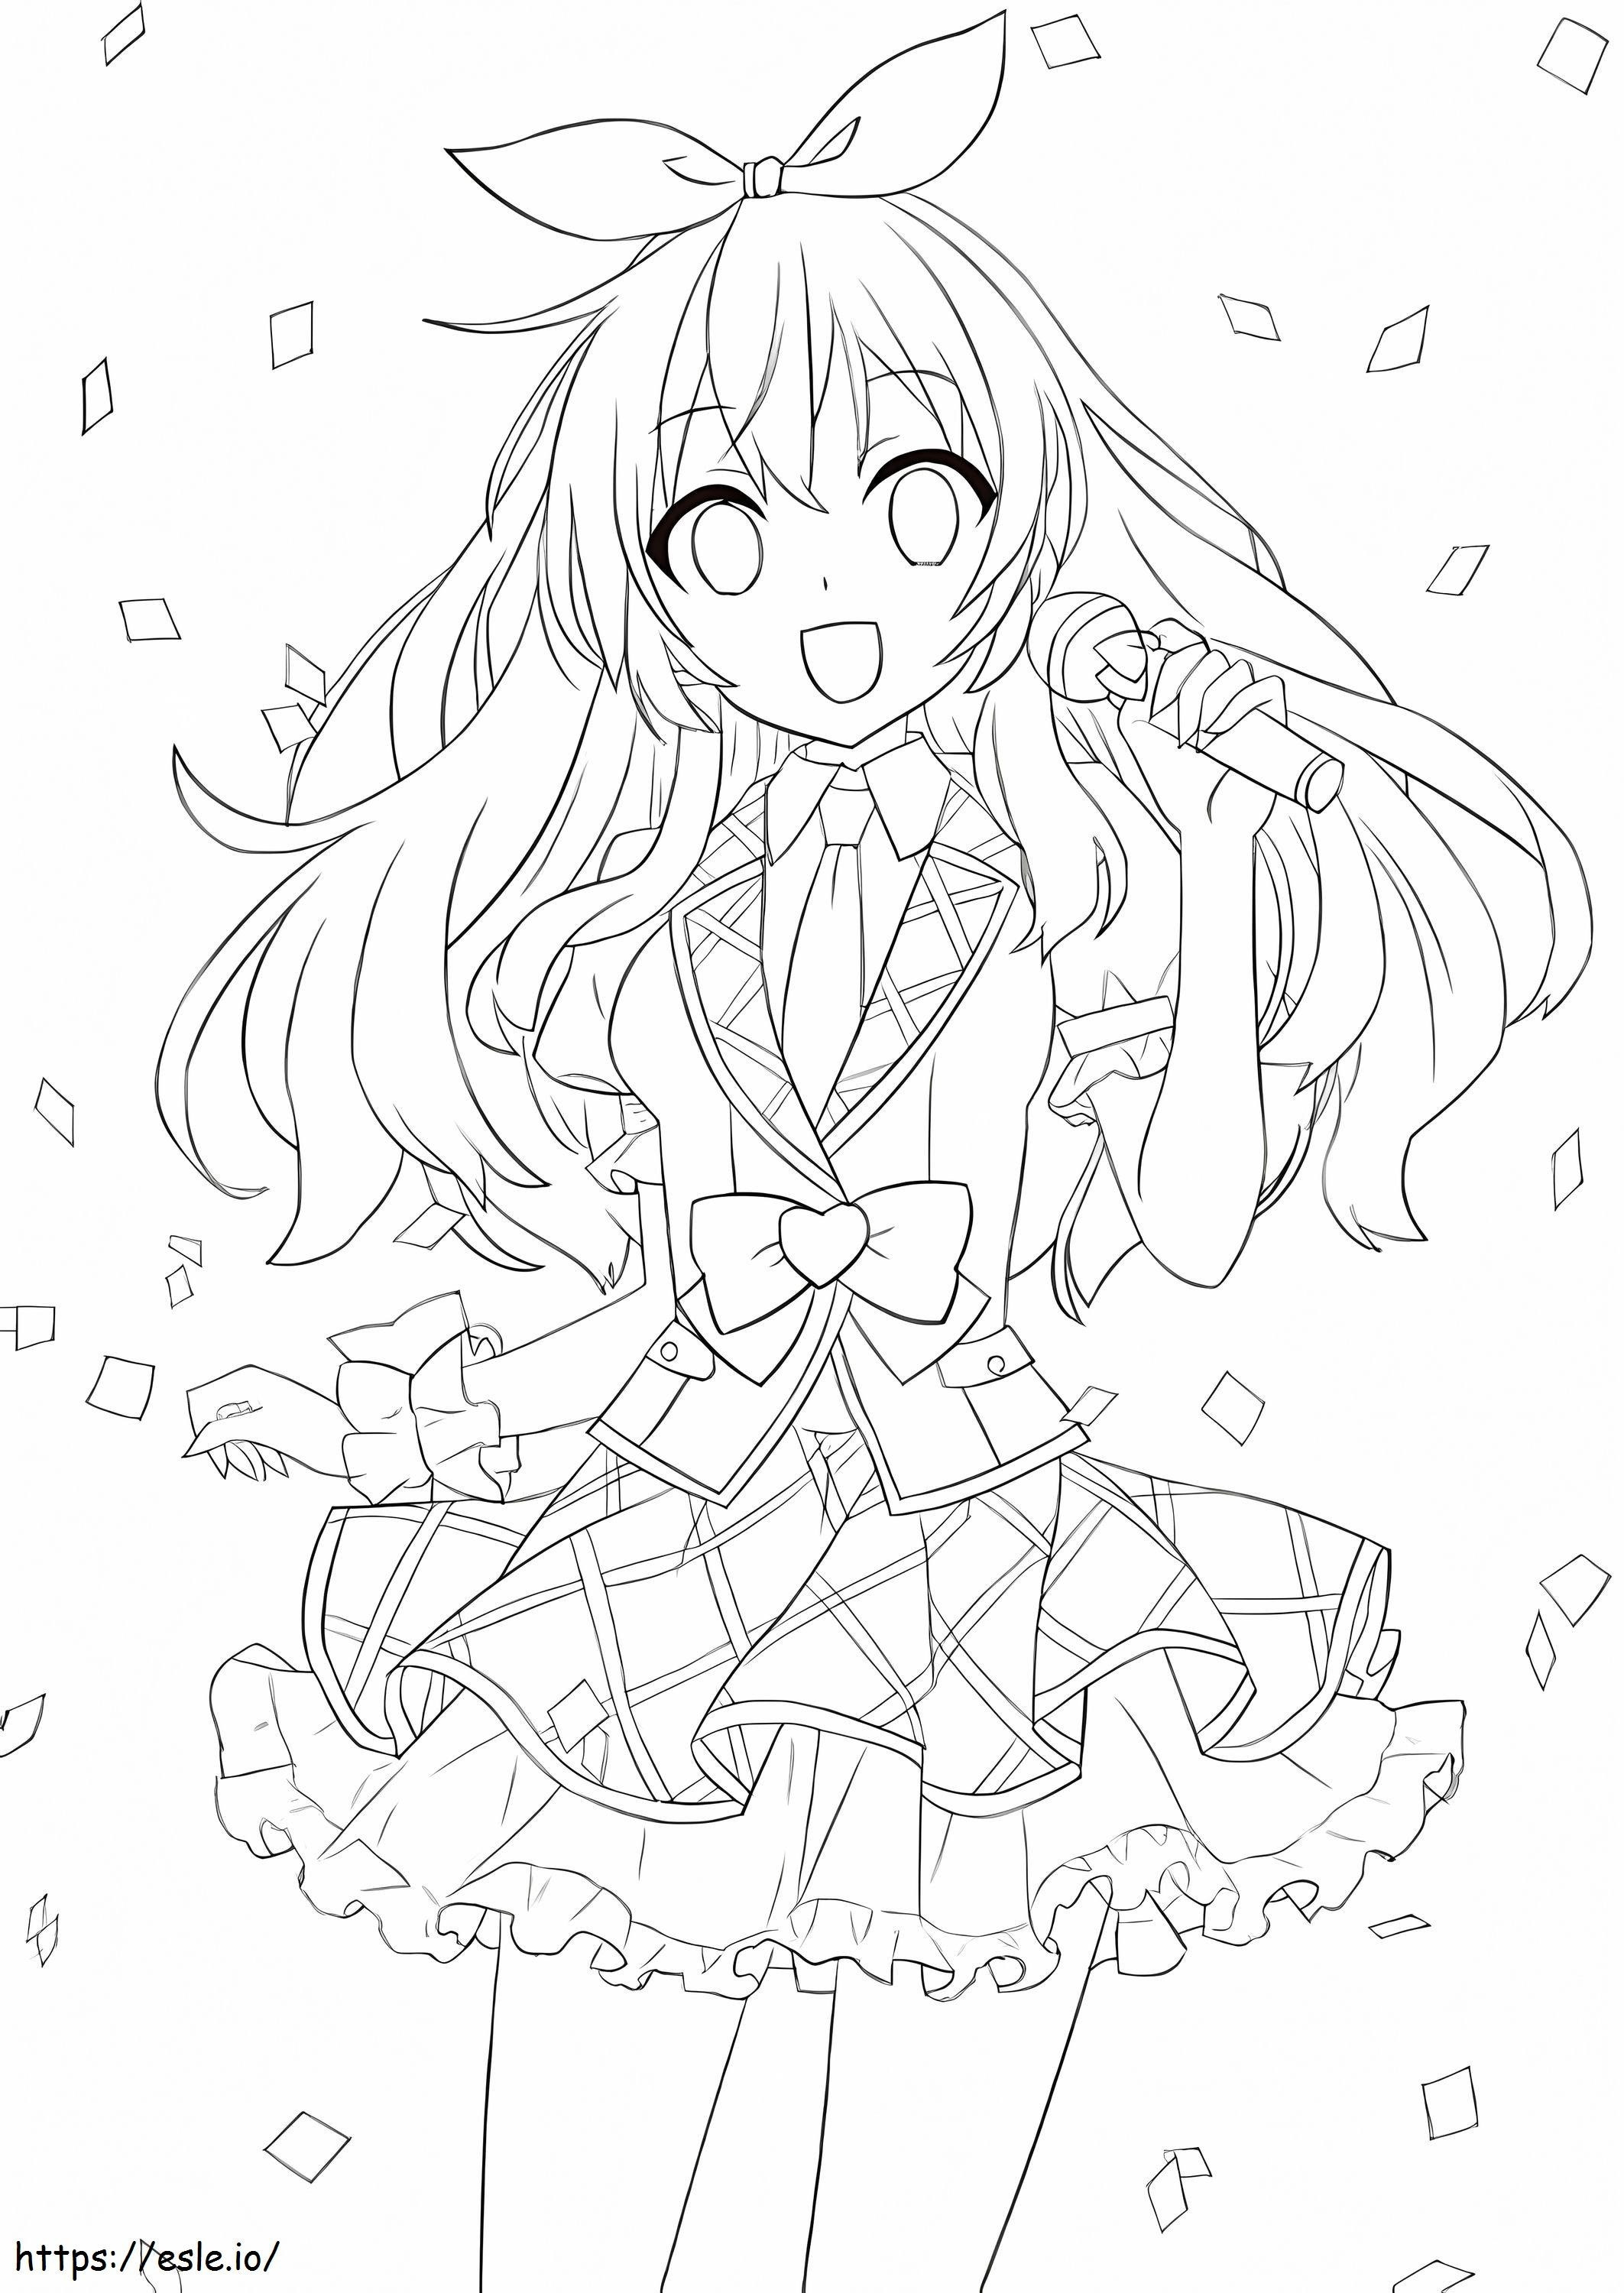 1564969354 Anime Girl Singing A4 coloring page